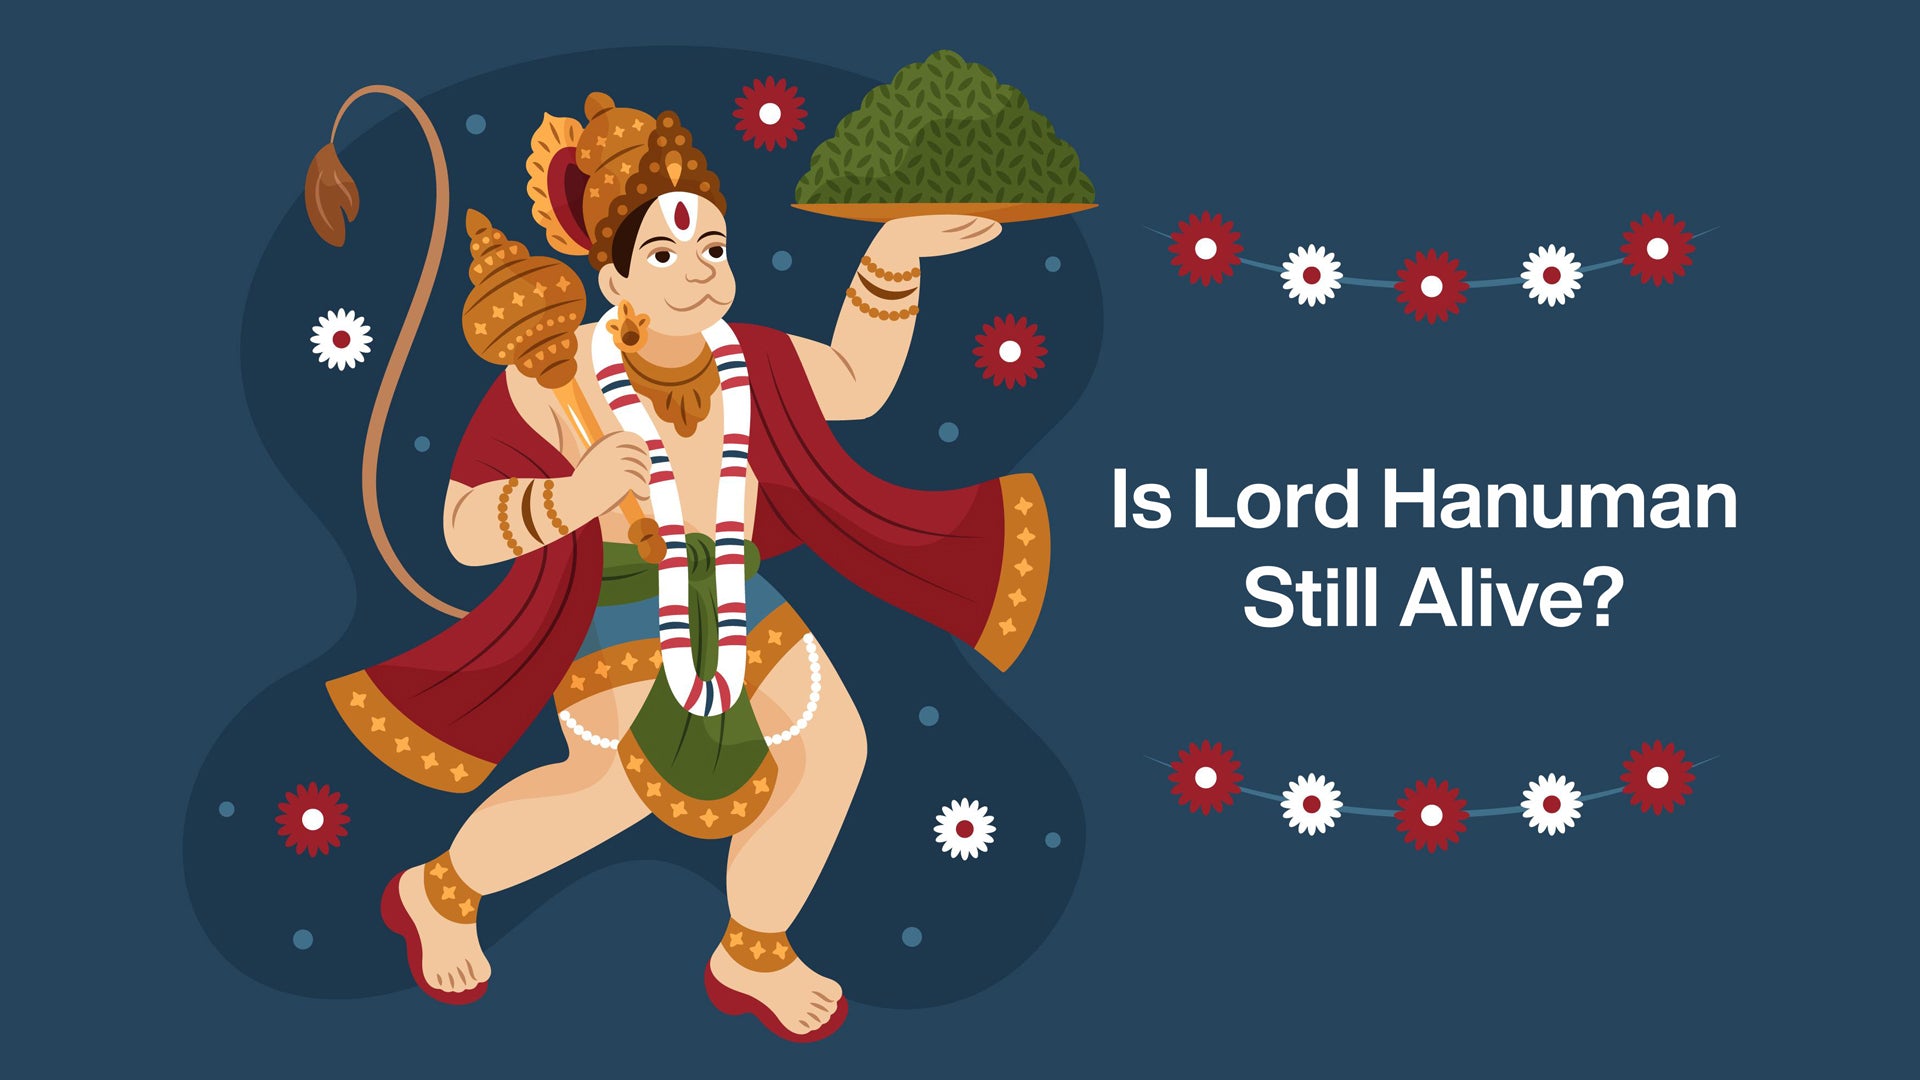 Is Lord Hanuman Still Alive in Today’s World?